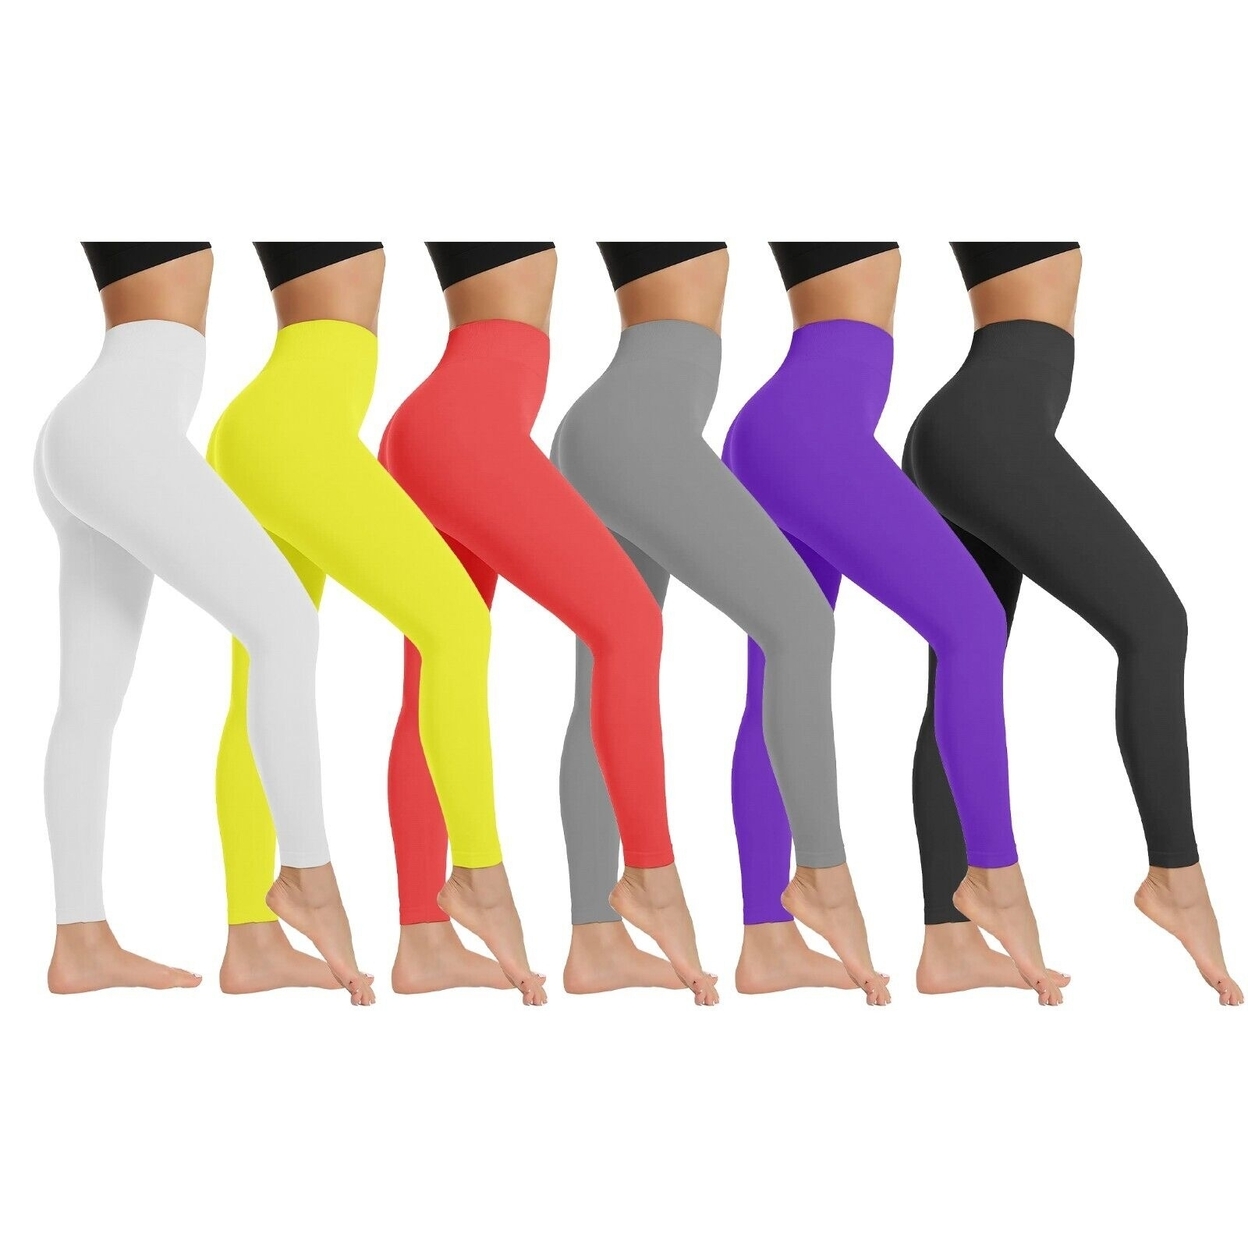 2-Pack: Women's High Waist Super Soft Active Athlete Stretch Yoga Cozy Leggings - Yellow & Yellow, Small